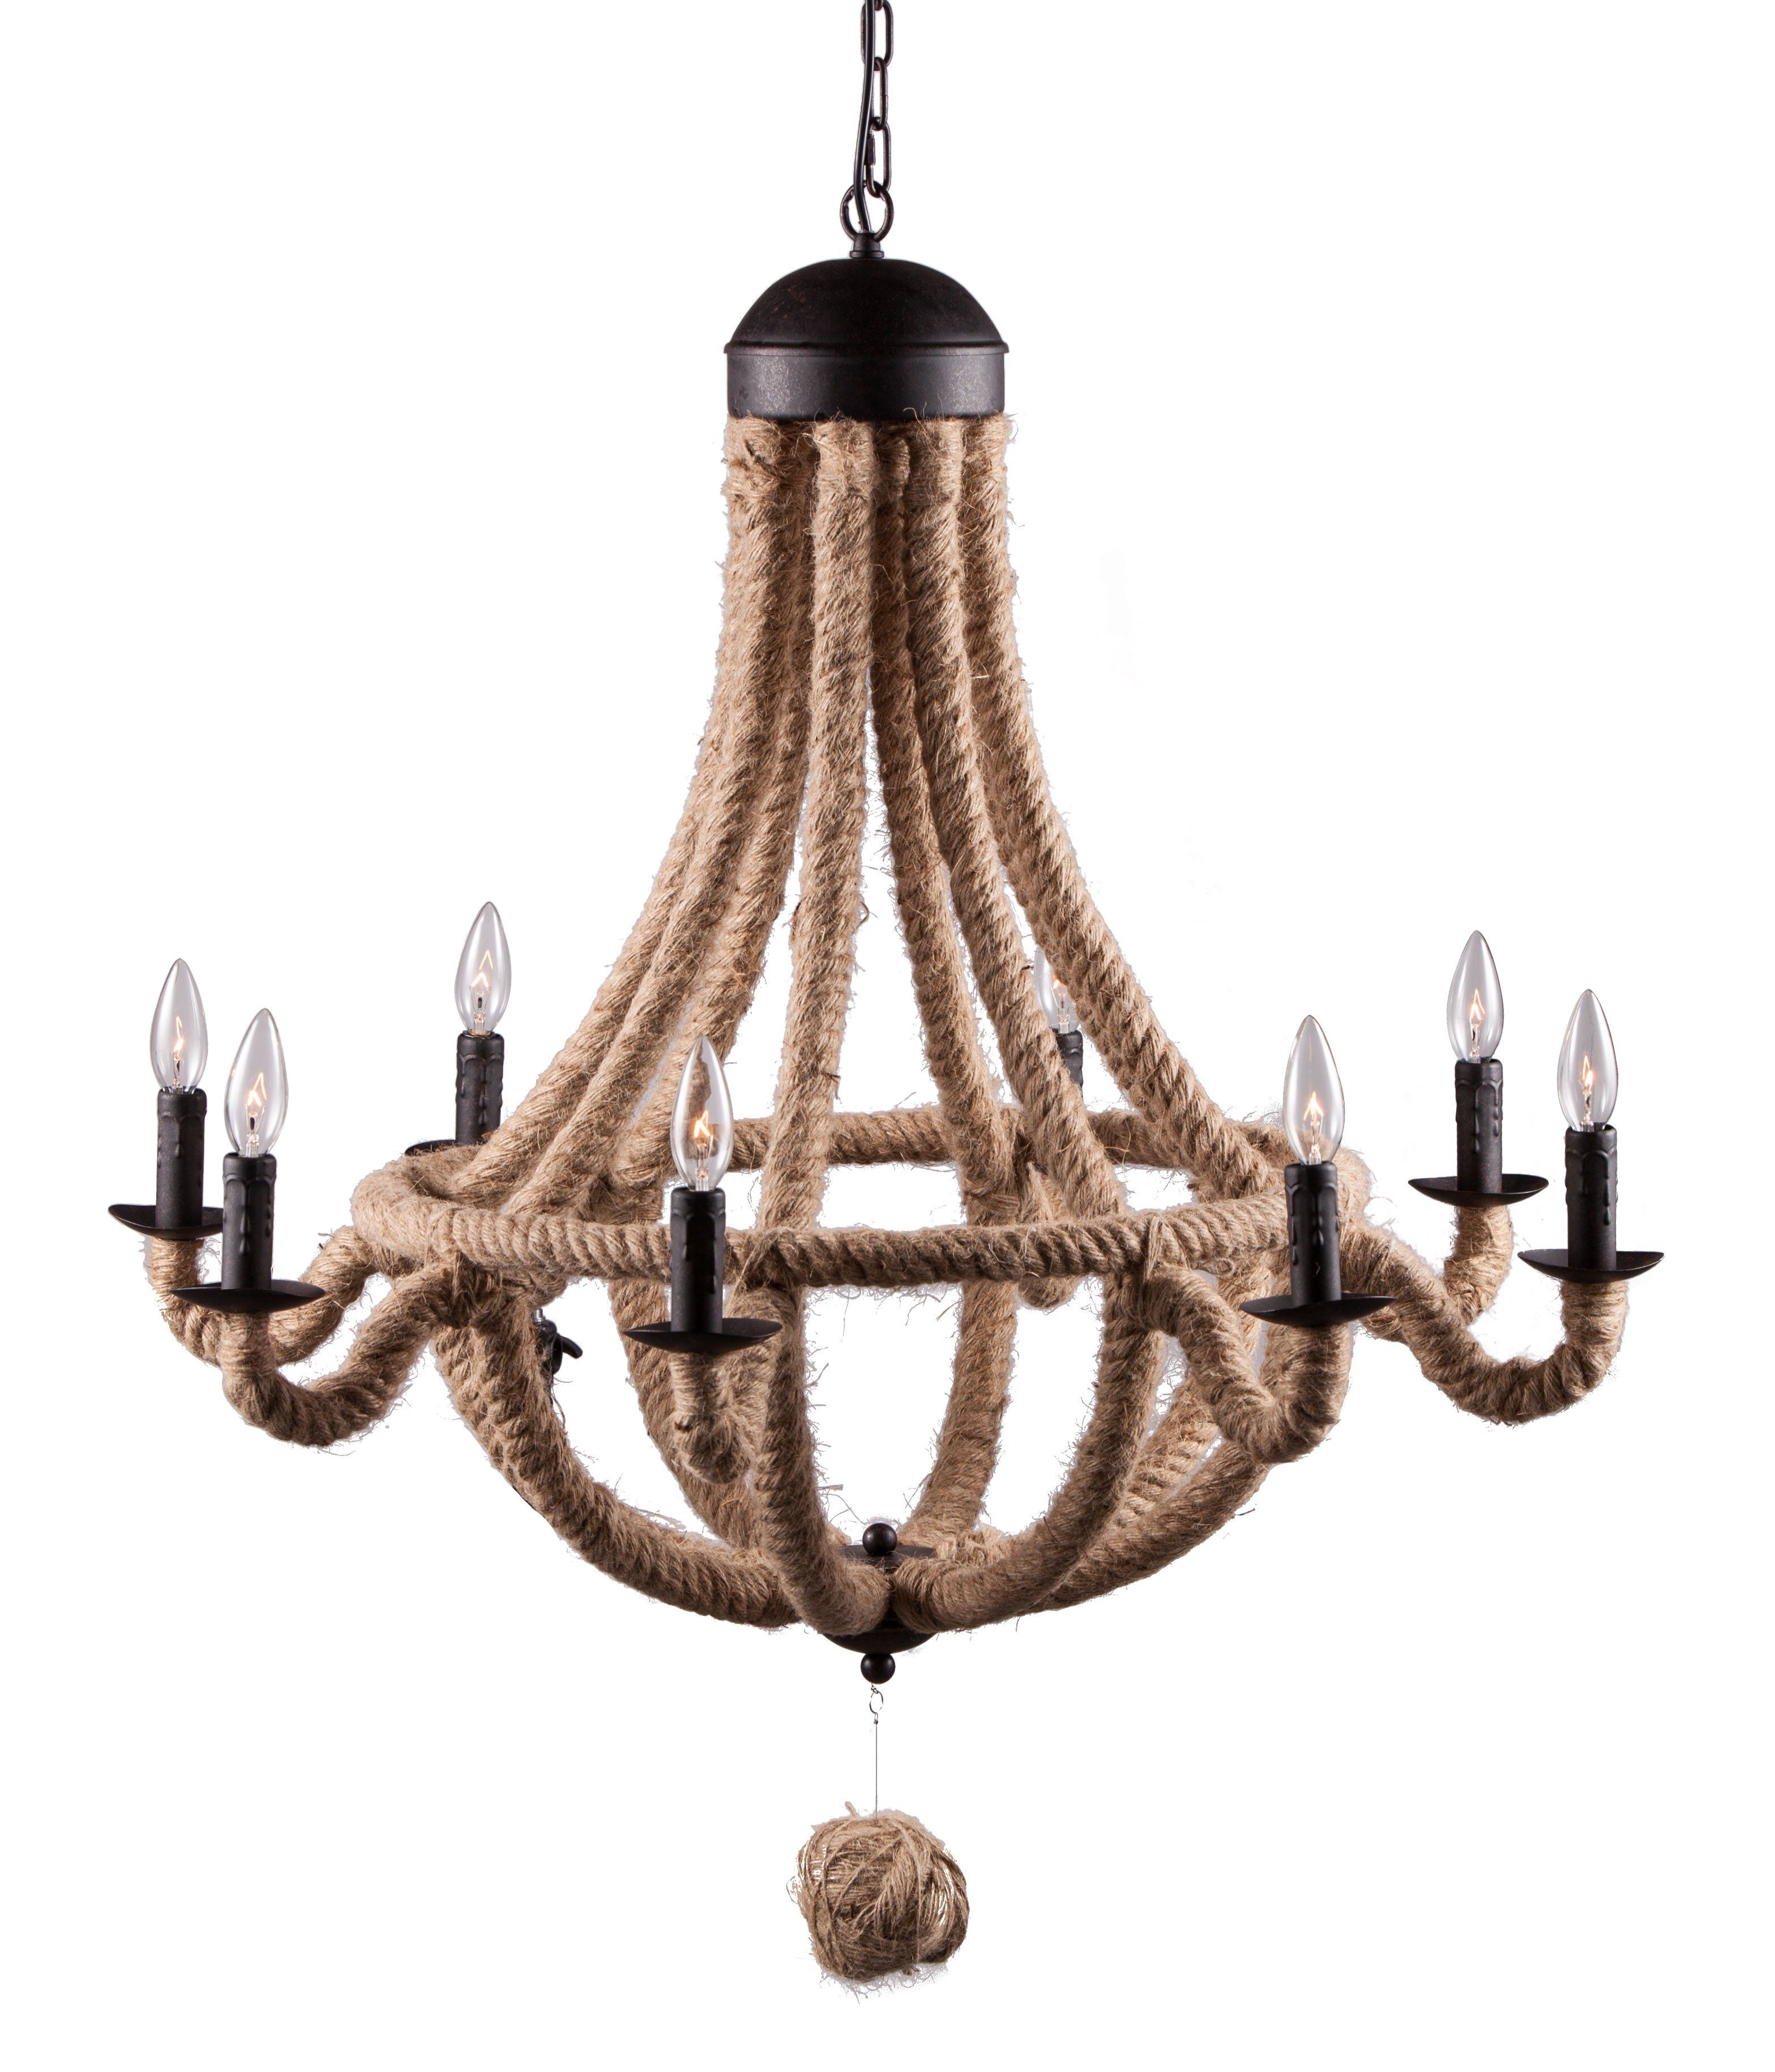 Celestine Ceiling Lamp In 2019 | Products | Ceiling Lights With Phifer 6 Light Empire Chandeliers (View 27 of 30)